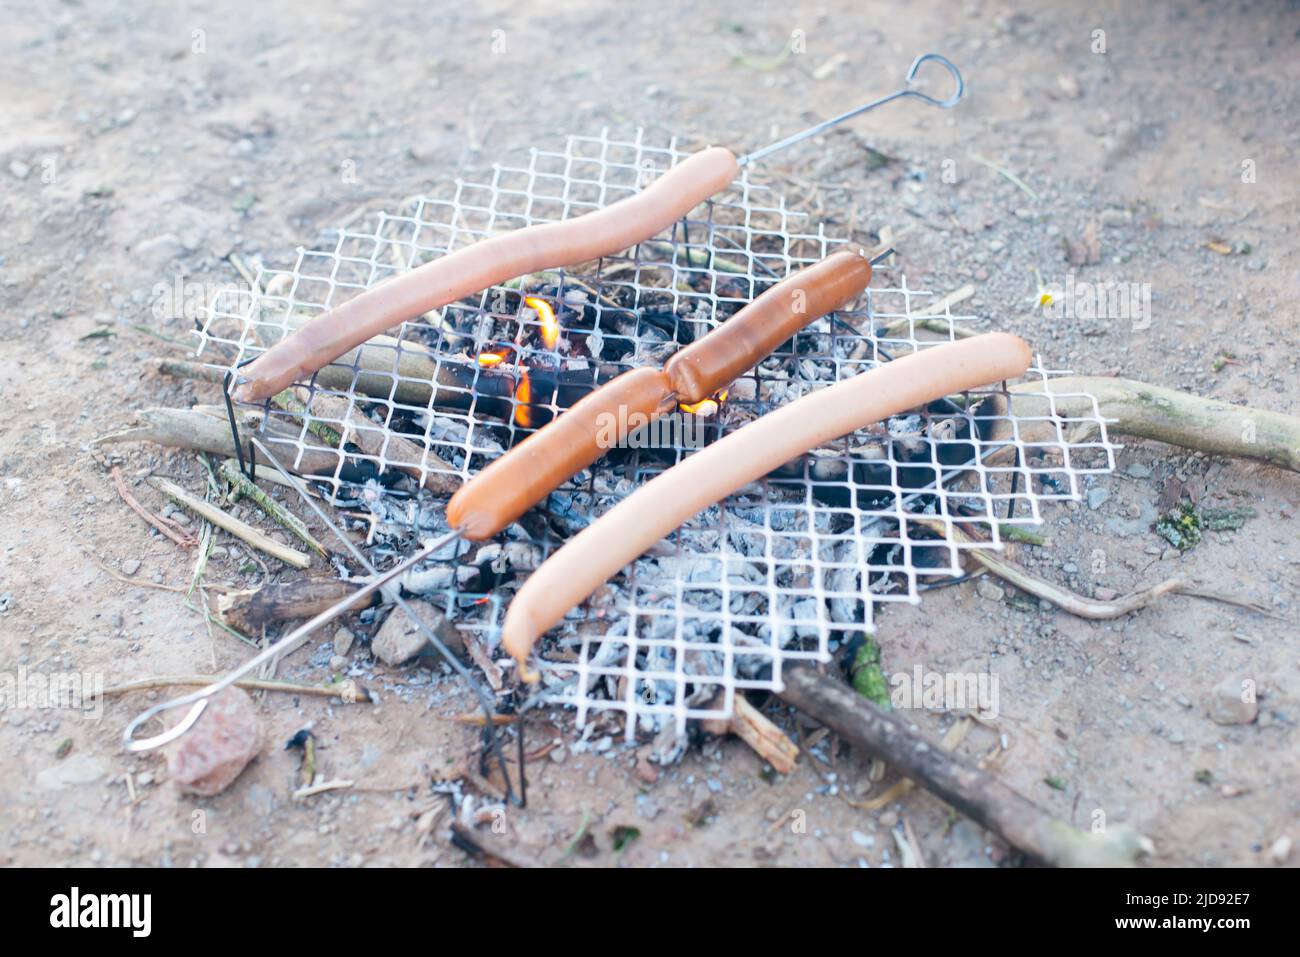 Hot dog sausage on a campfire, preparing food in the wilderness, bush craft and survival concept, grilled meat, vacation trip Stock Photo